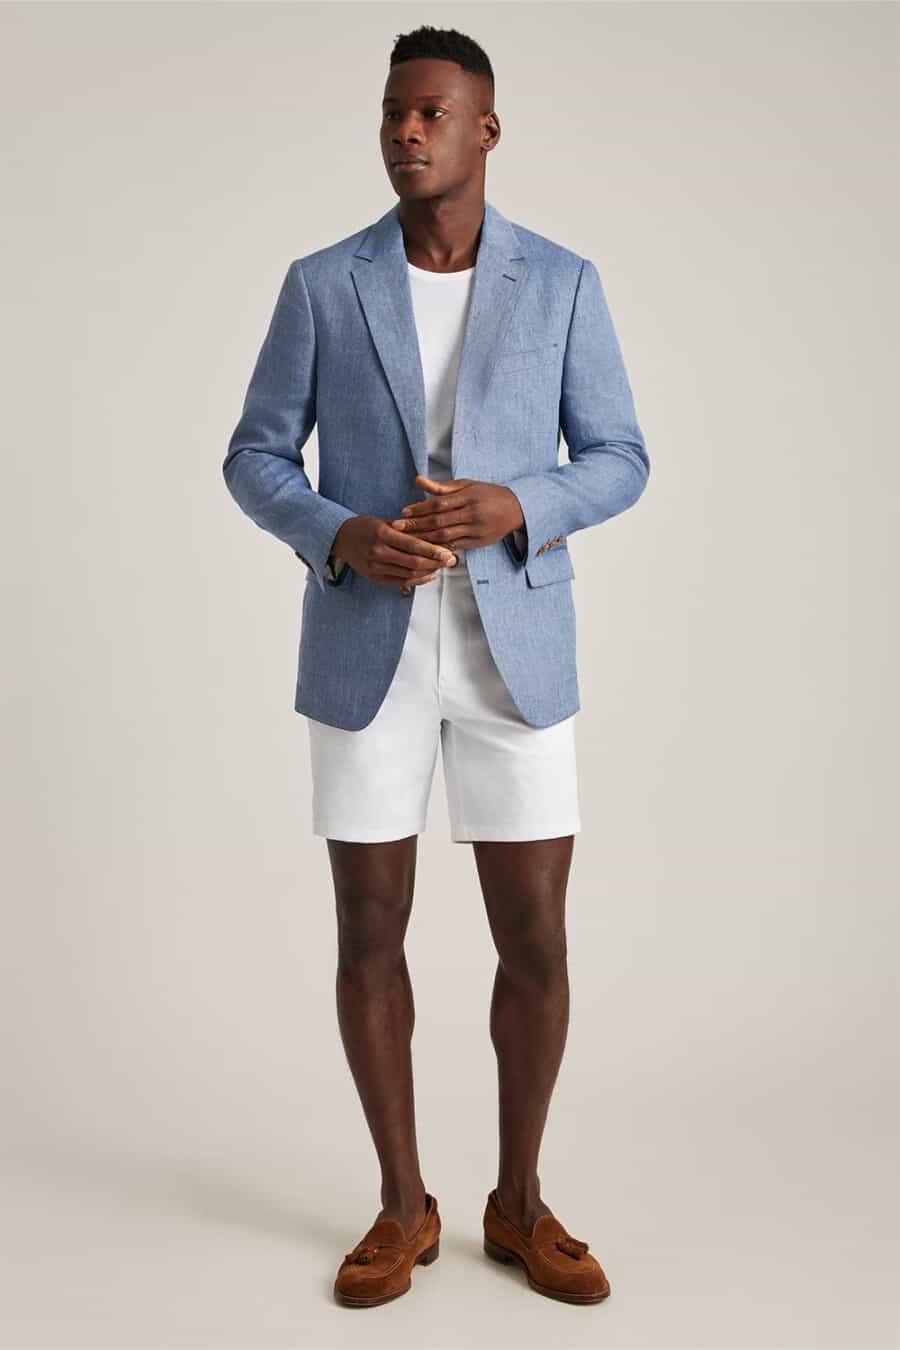 Men's white shorts, white T-shirt, light blue blazer and cognac brown suede tassel loafers outfit